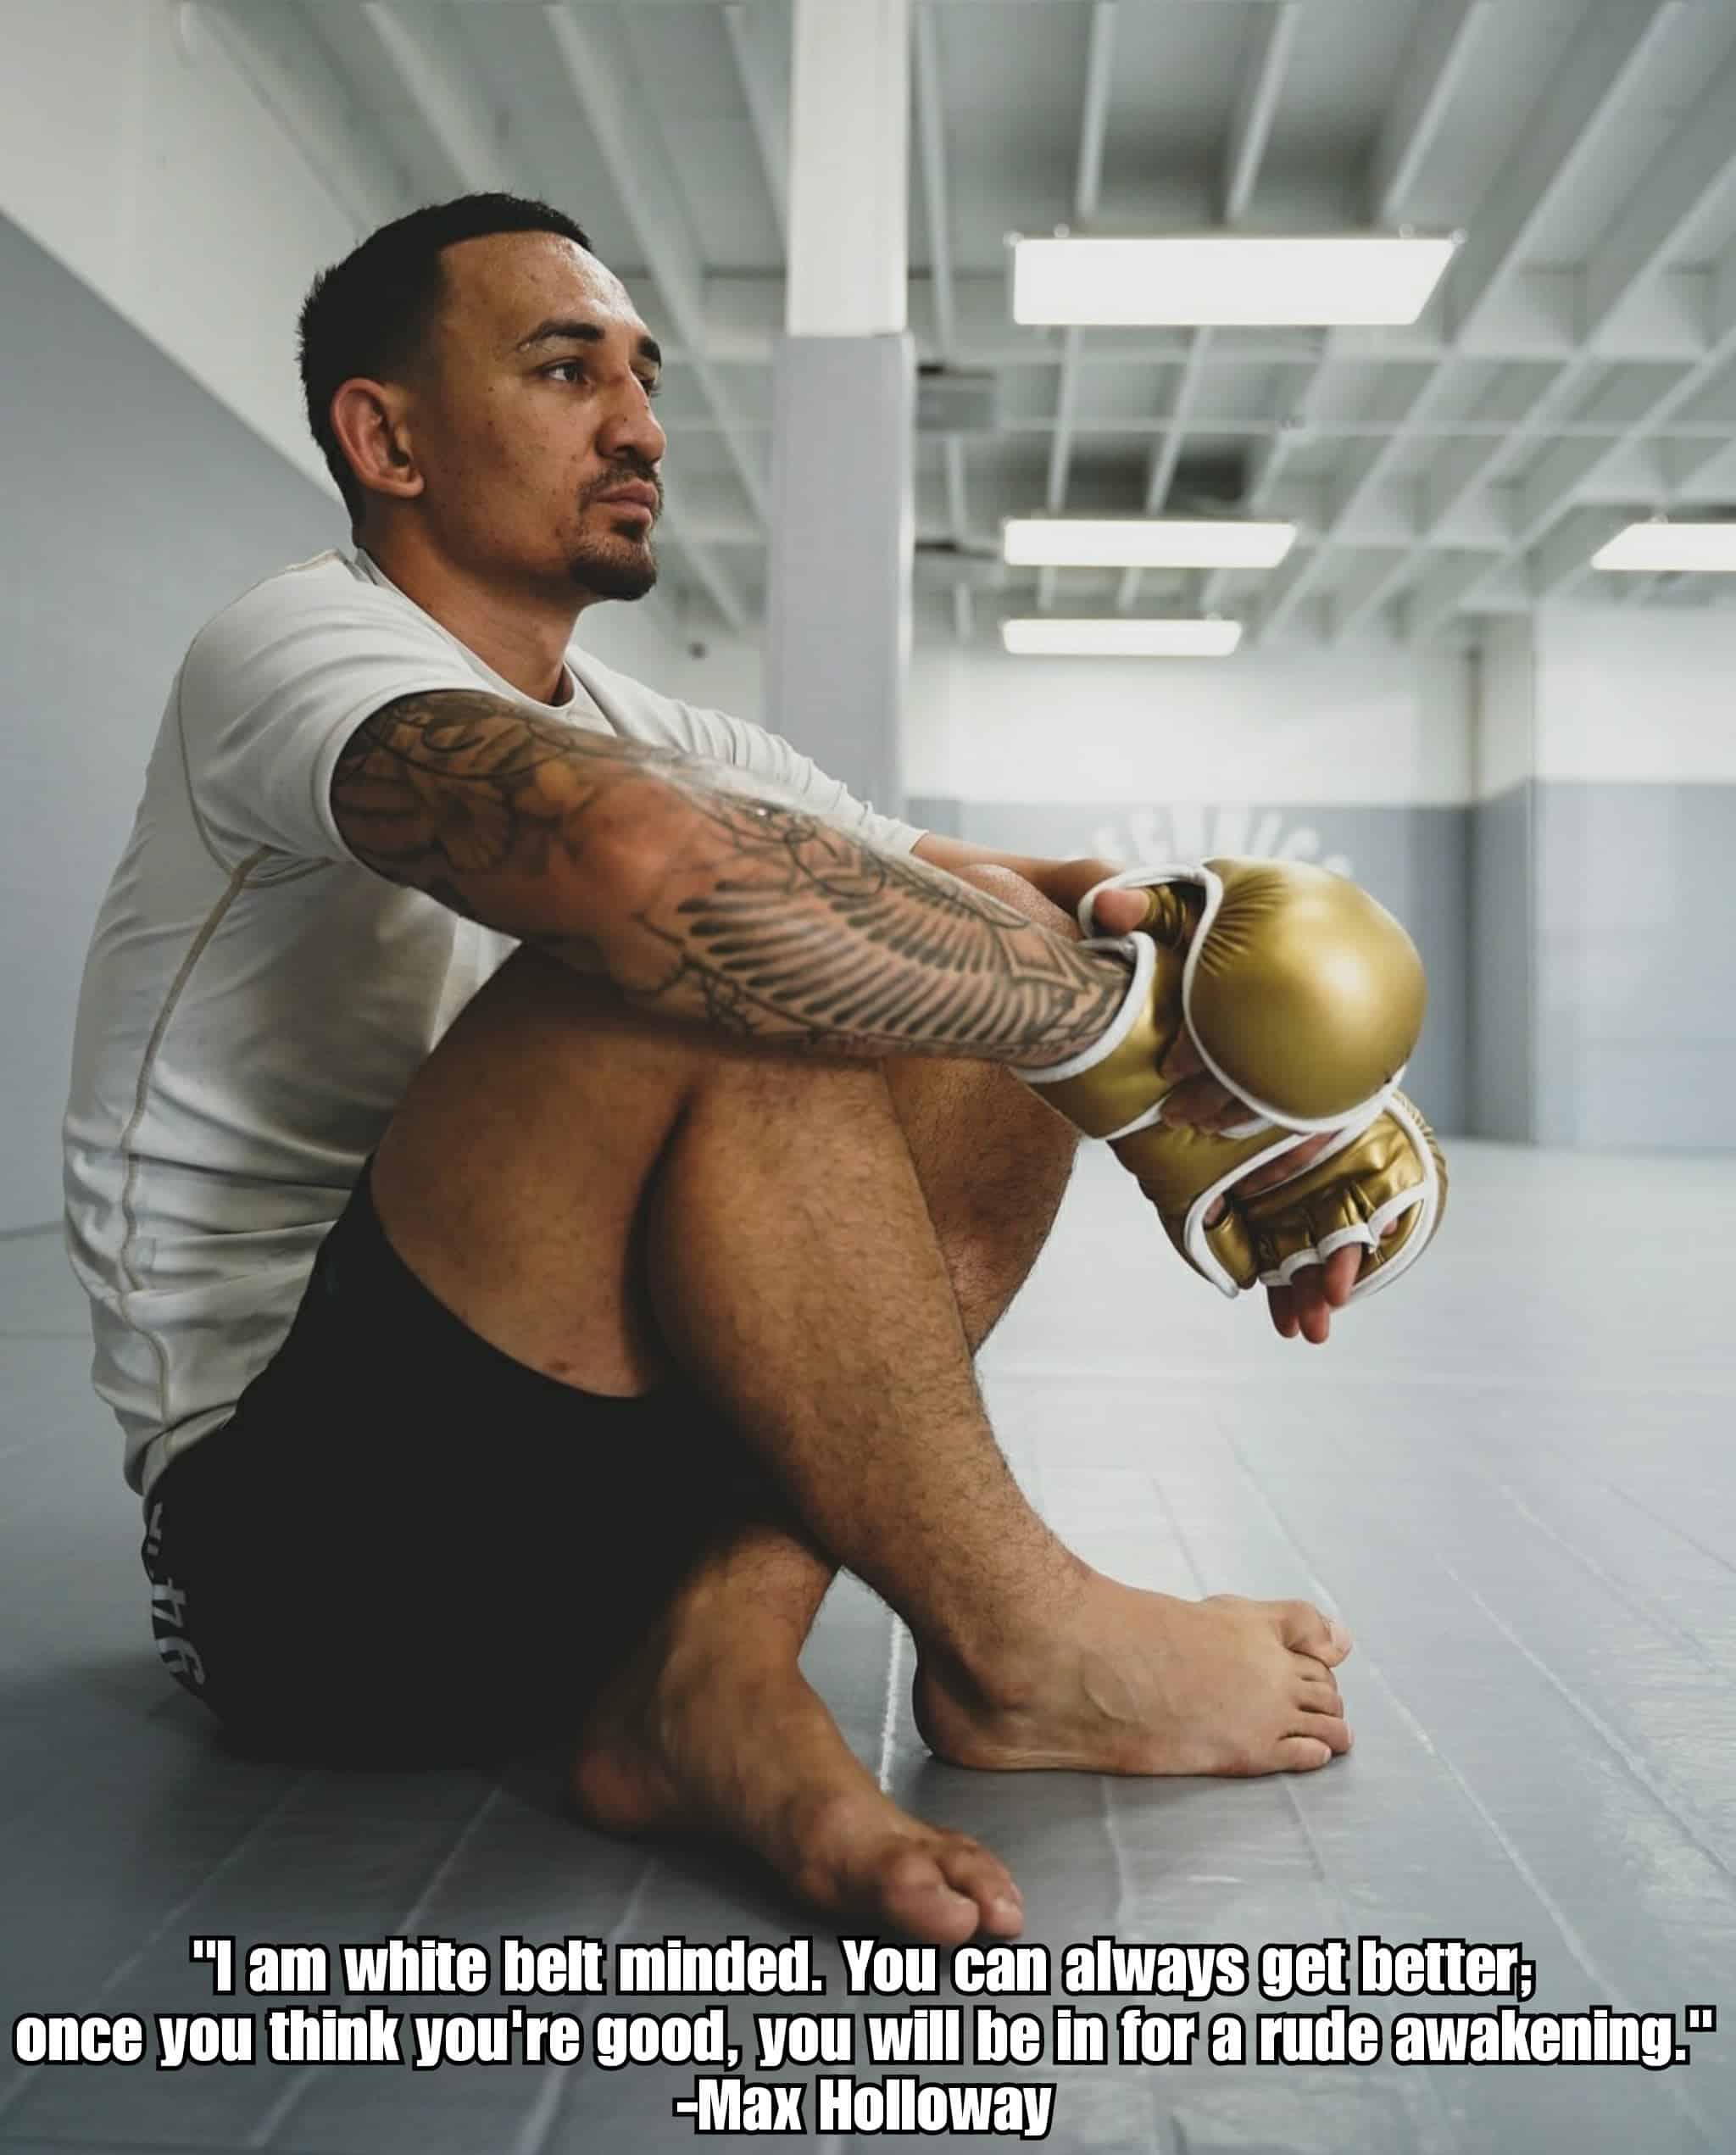 Max Holloway quote on getting better